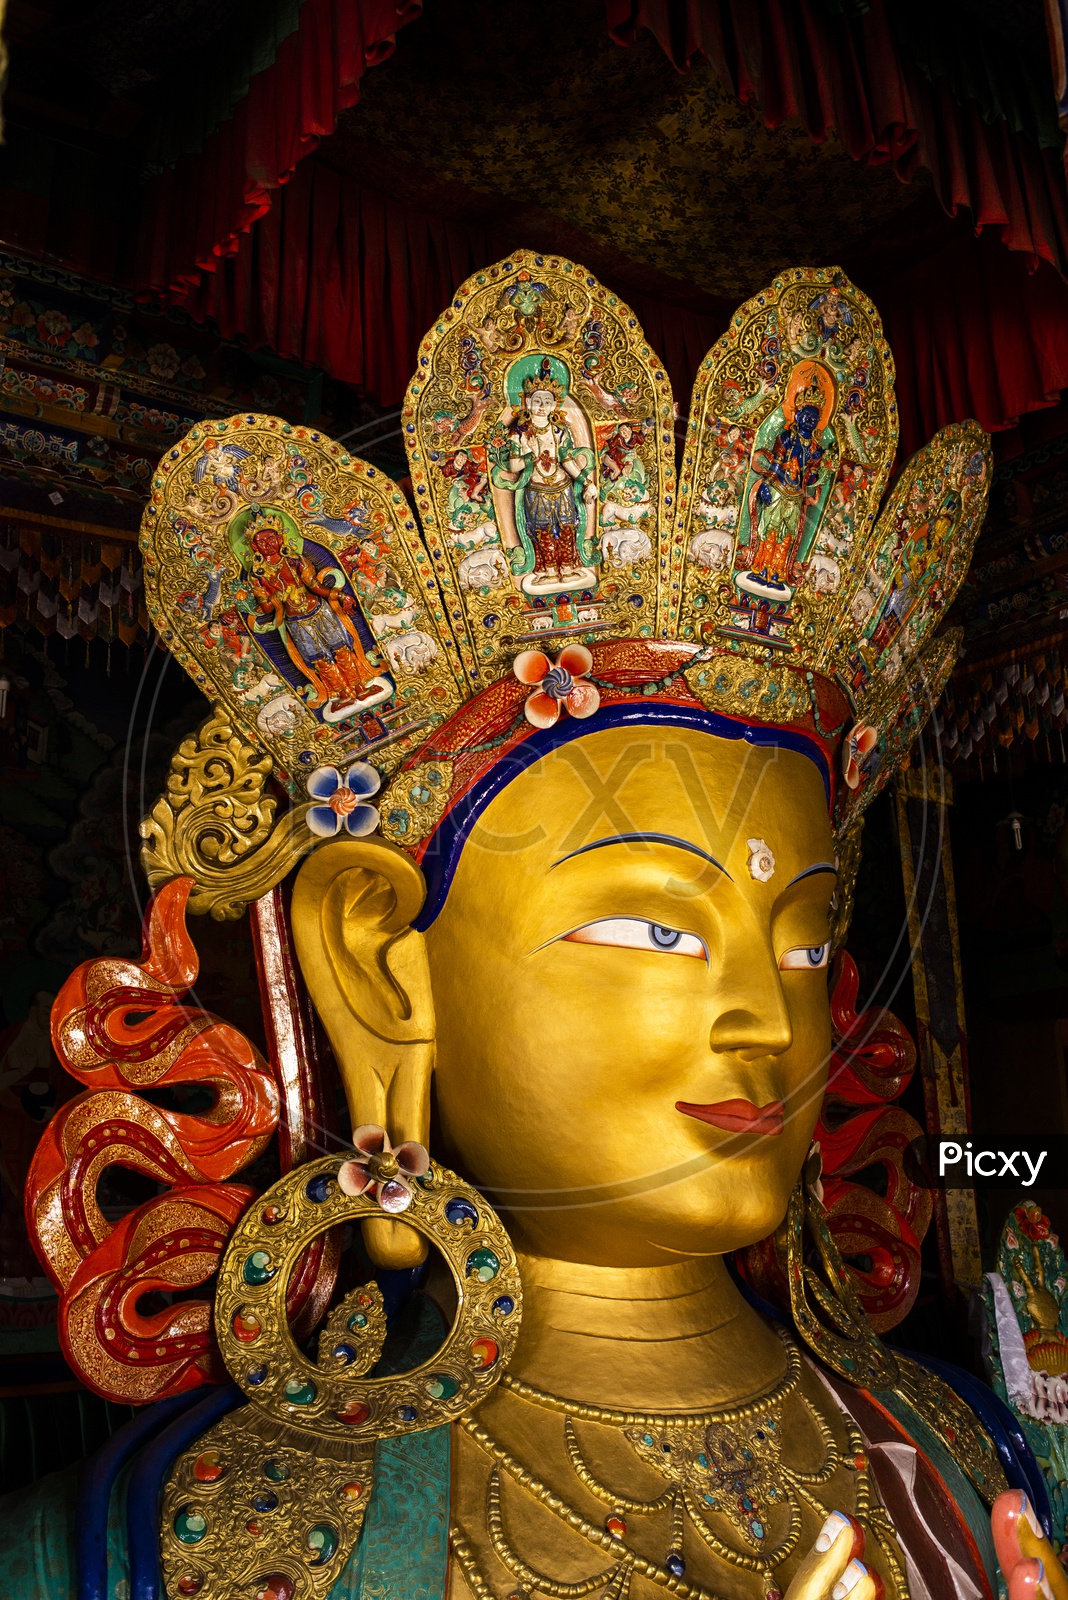 Buddha Statue in Thikse Monastery